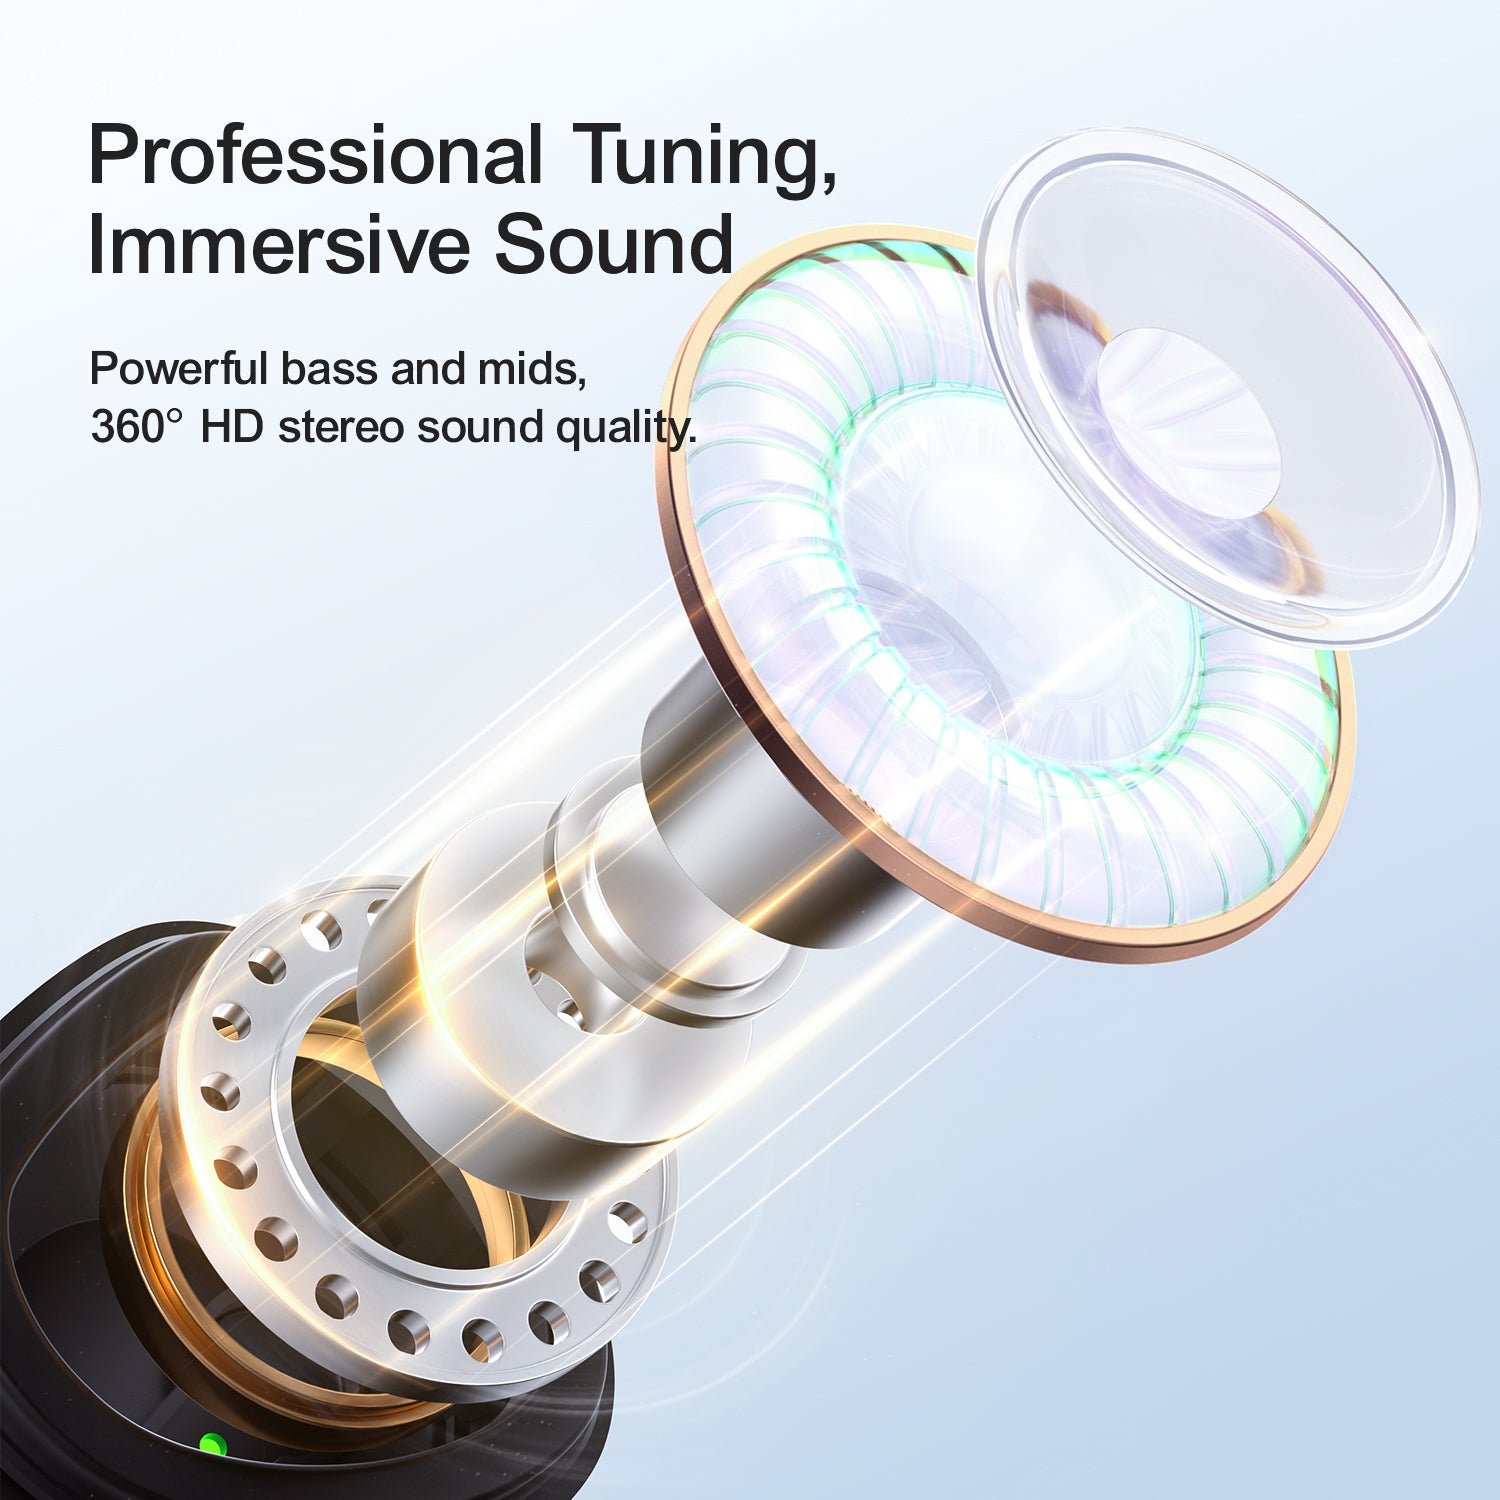 Professional Tuning, Immersive Sound